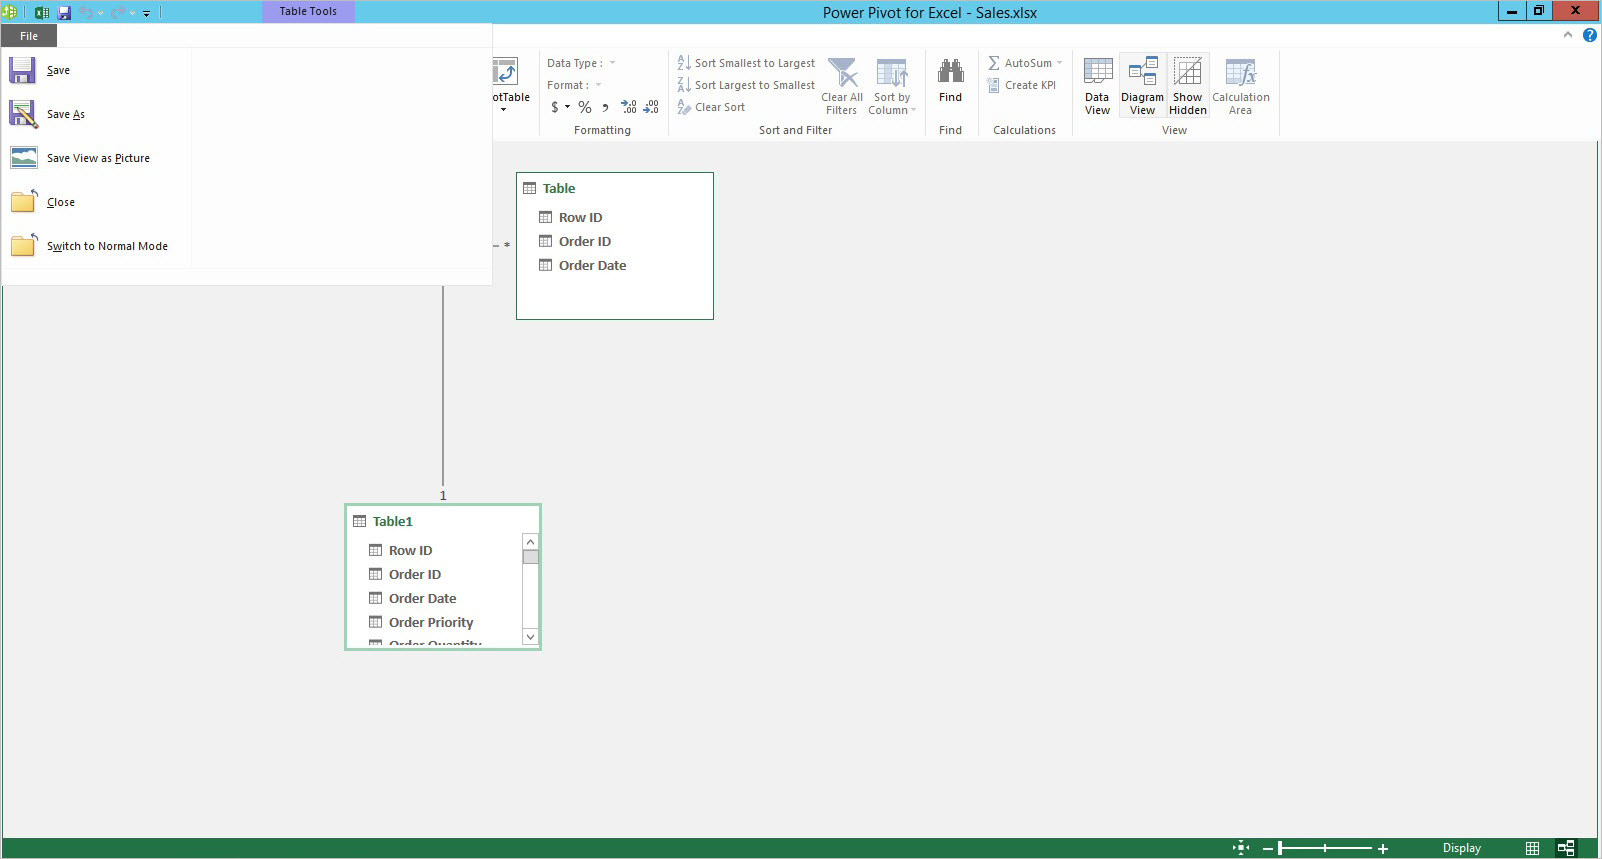 Use Power Pivot data in excel New-feature-updates-for-Power-Pivot-in-Excel-2016-1d.jpg